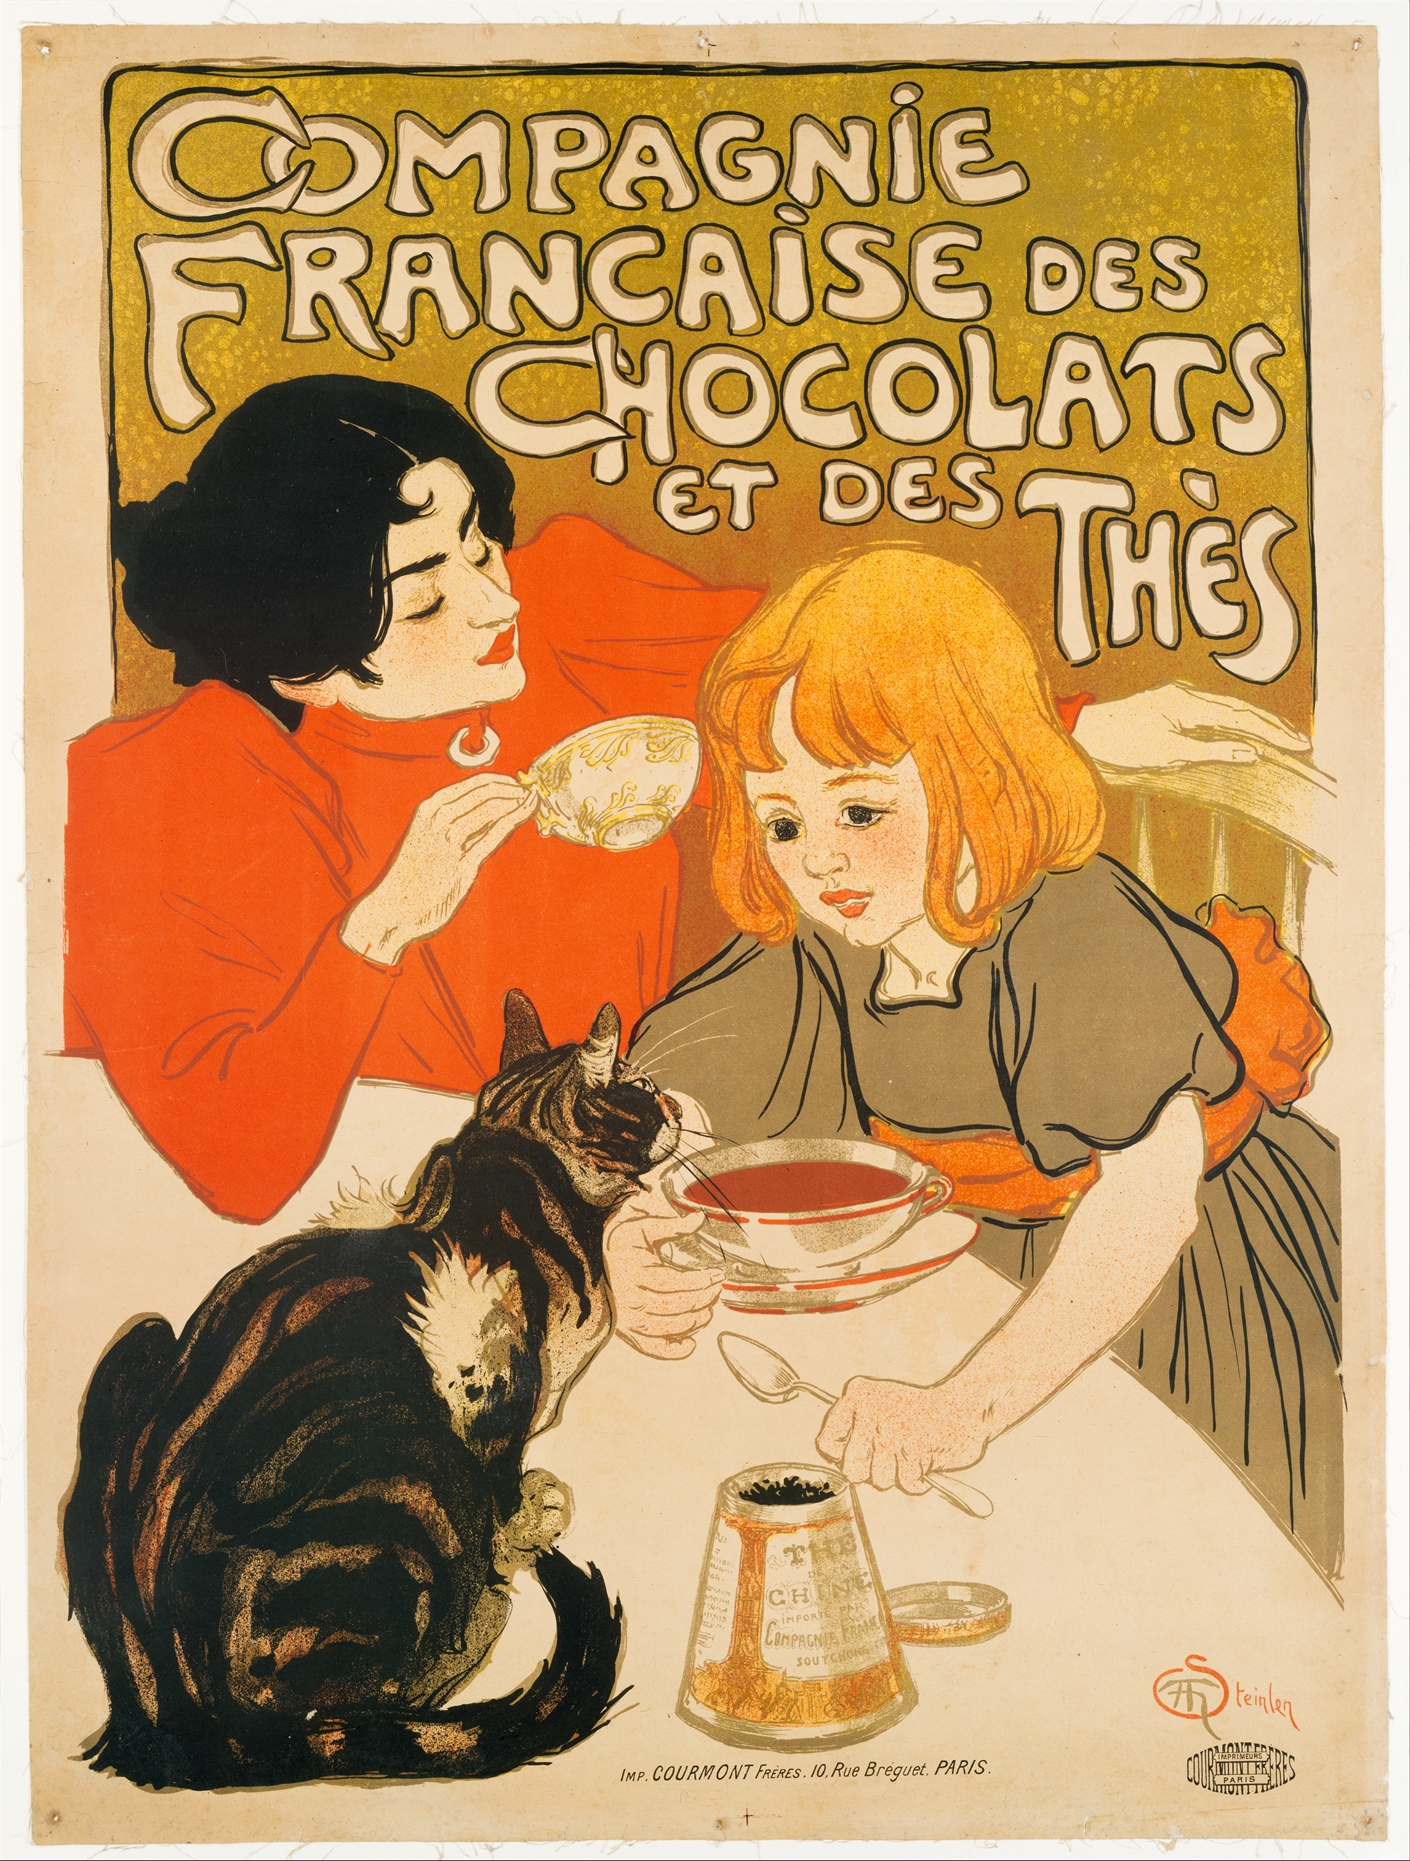 In "Compagnie Française des Chocolats et des Thès," Steinlen includes his wife and daughter in the illustration.